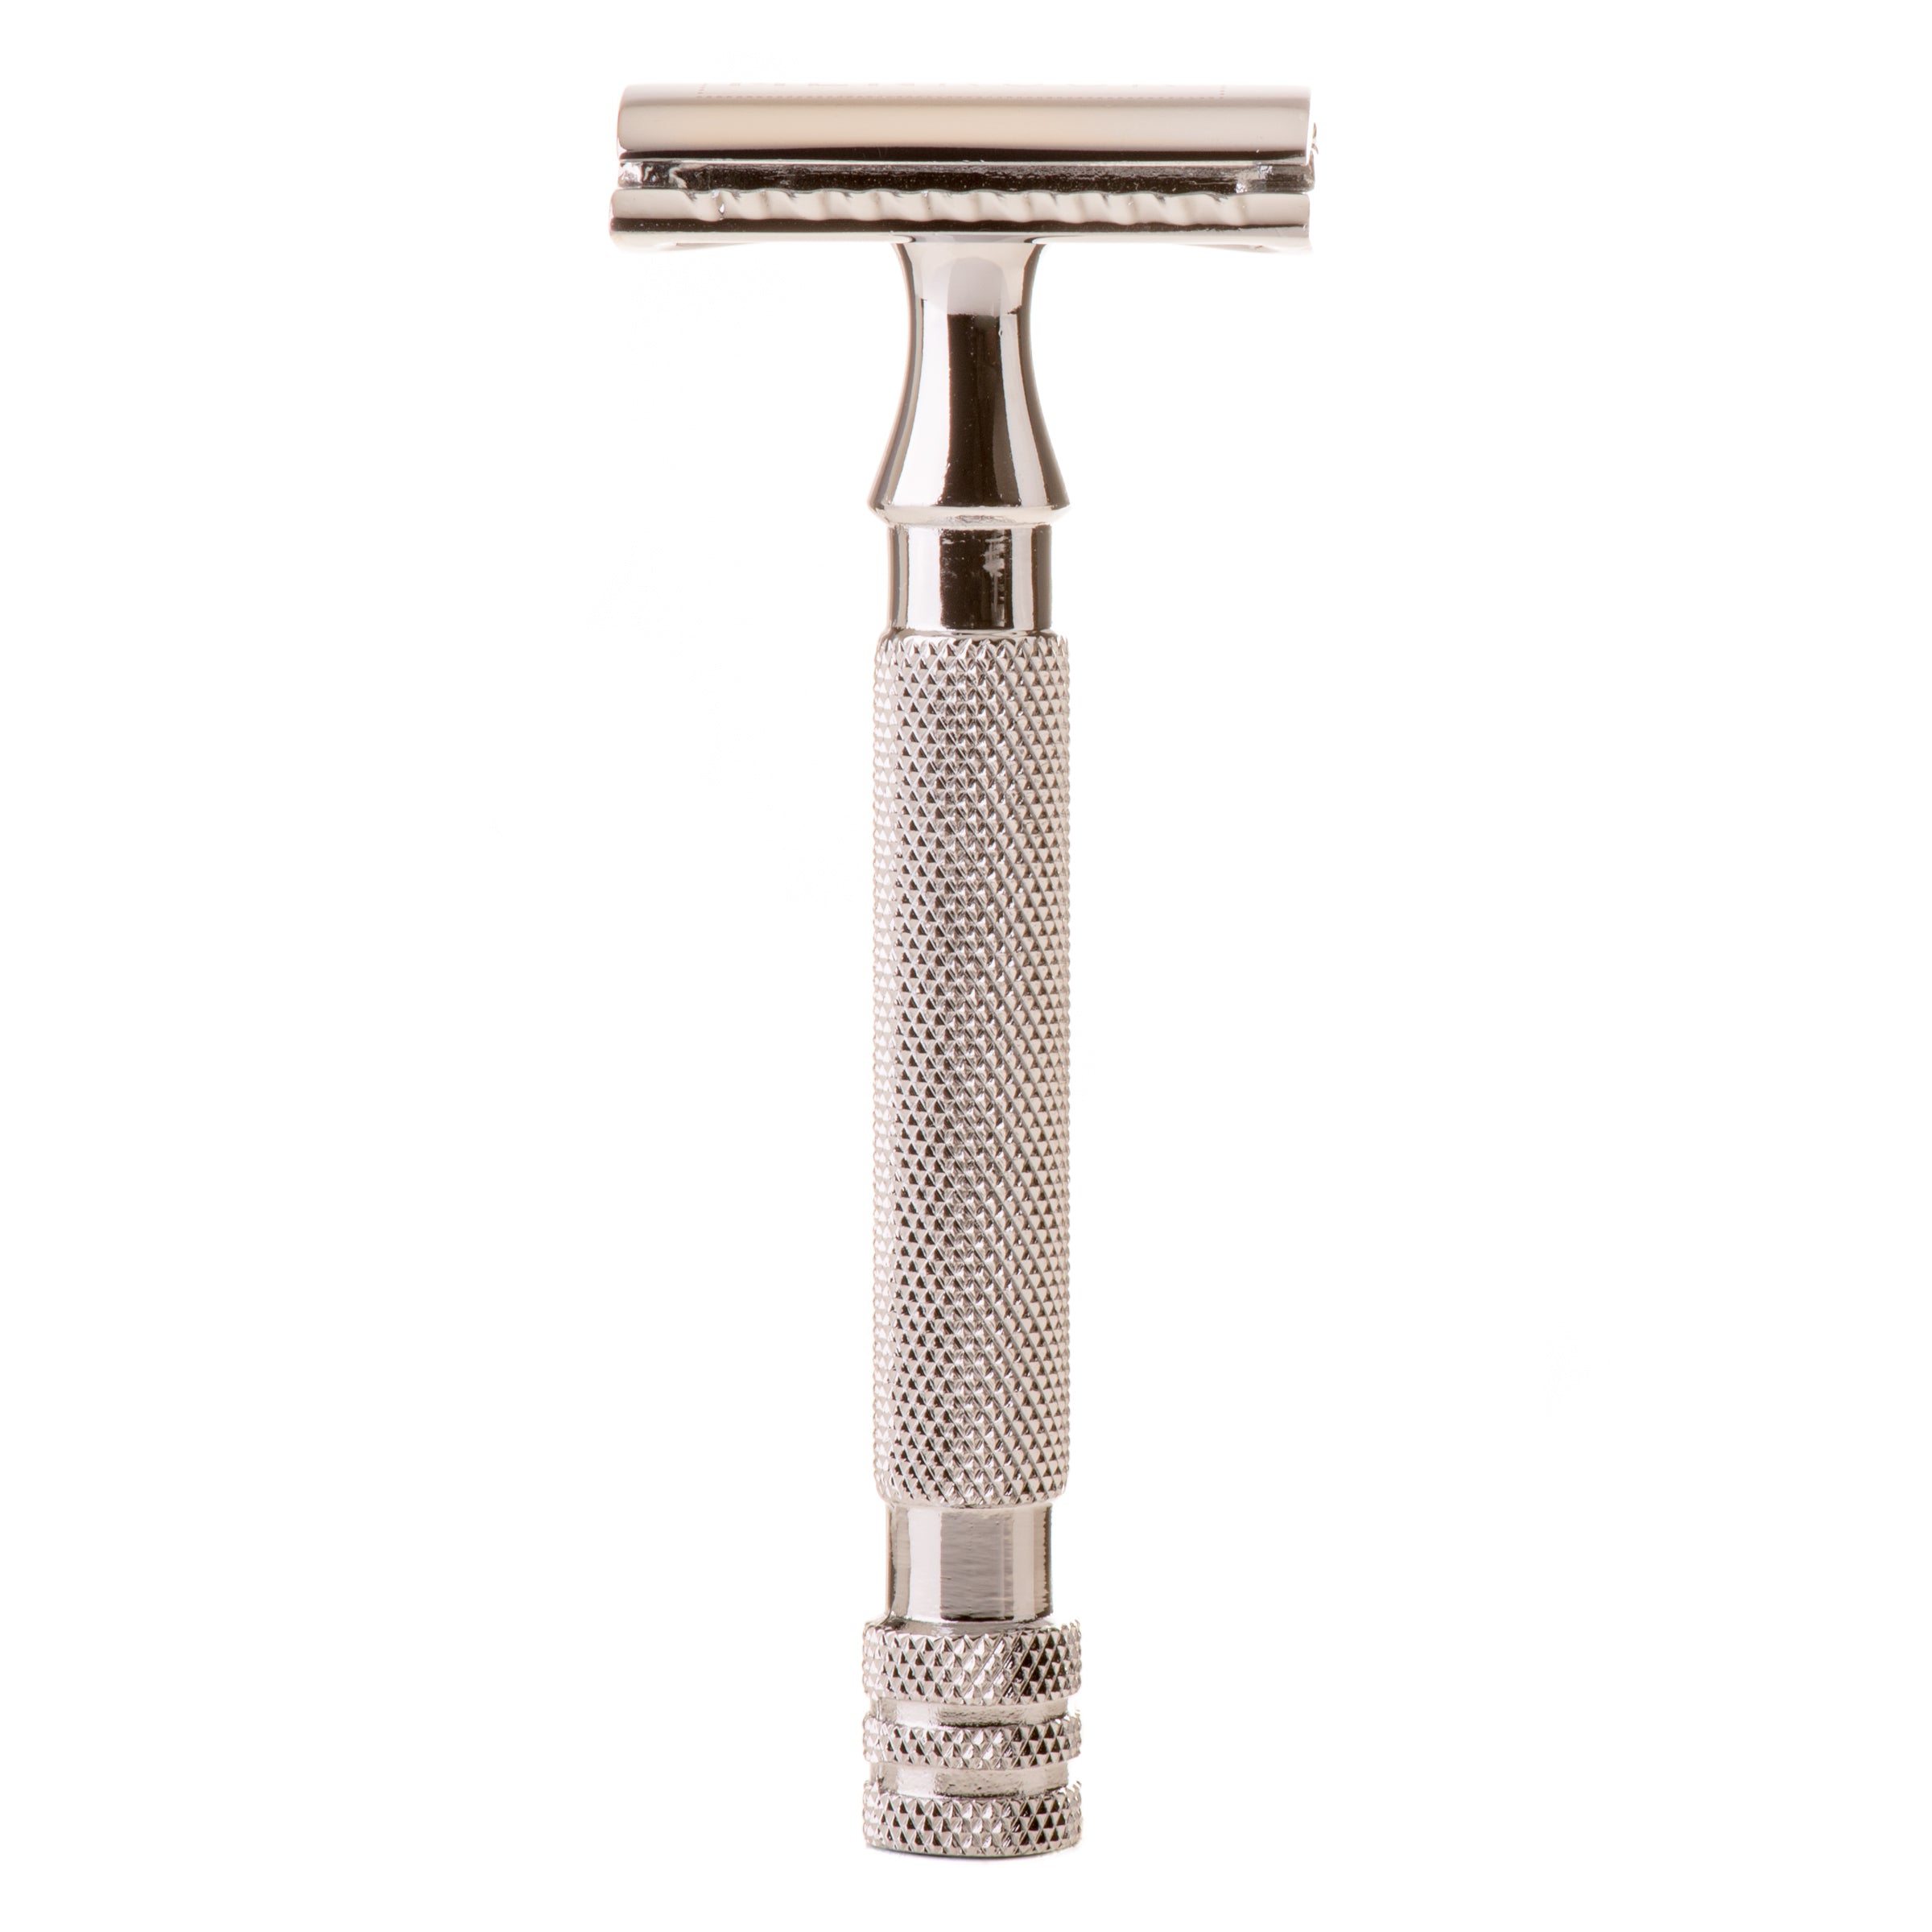 Double Edged Razor from Men Rock made out of stainless steel for a smooth shave.